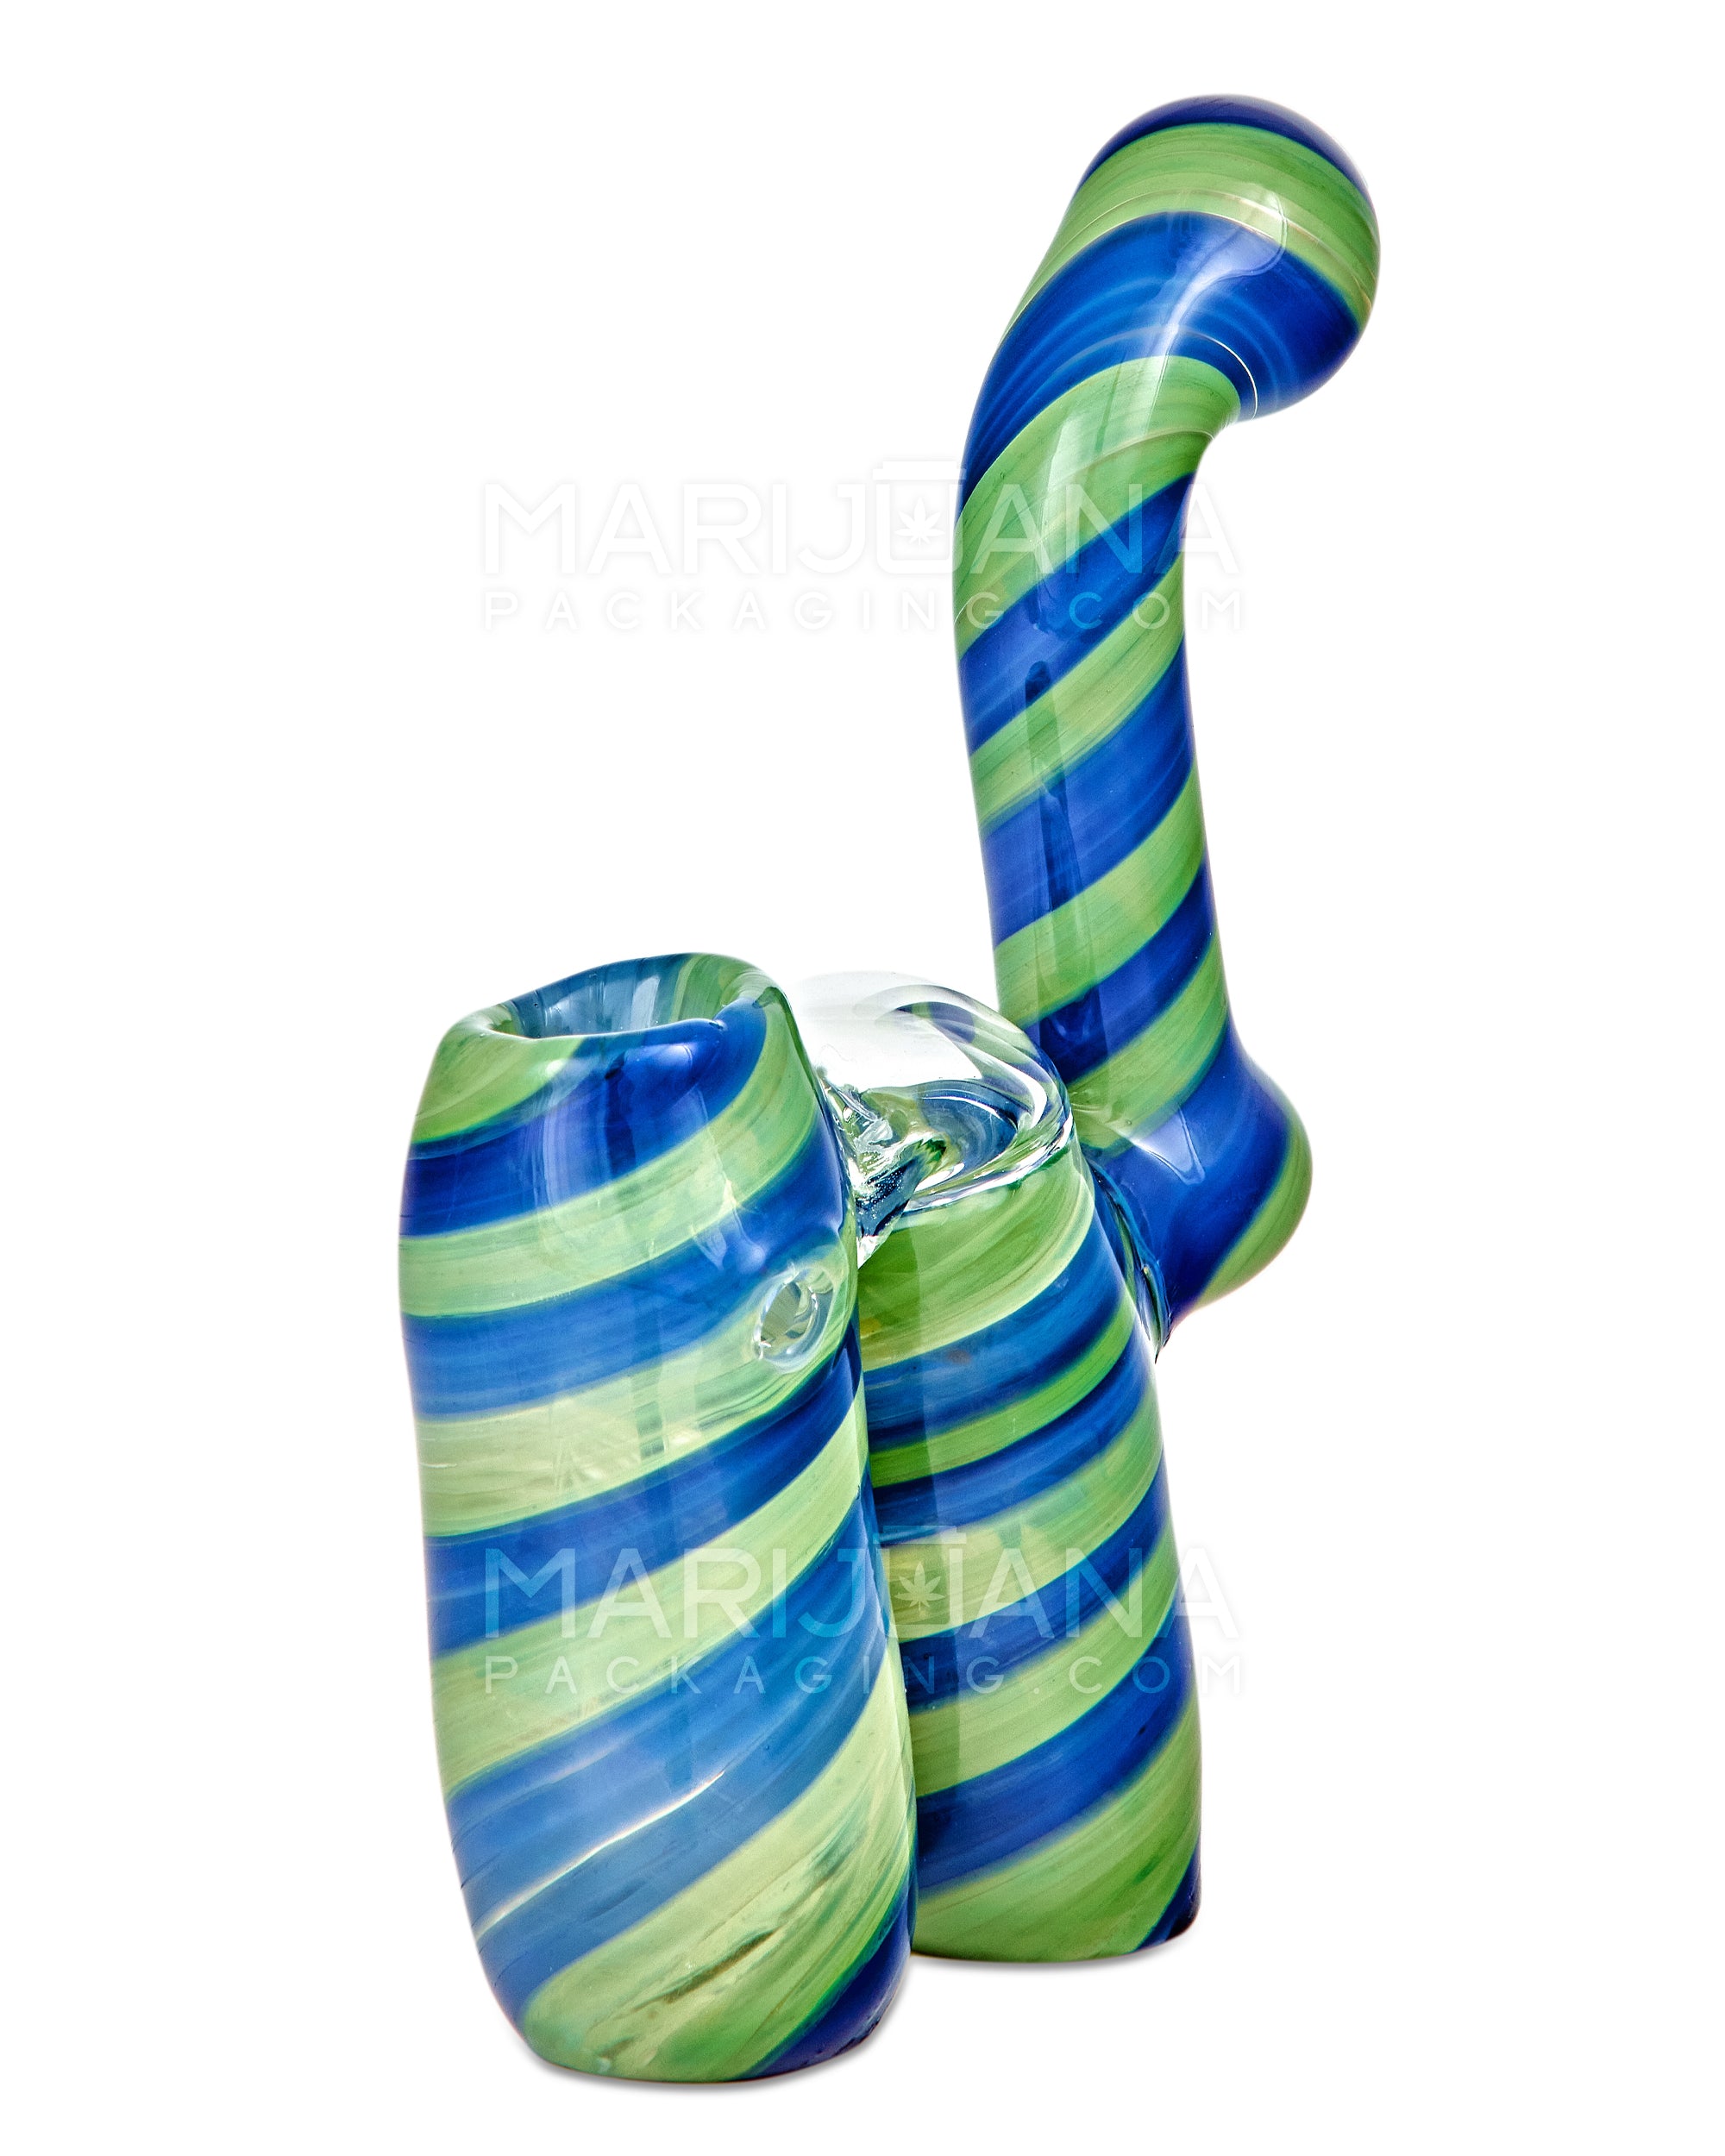 Spiral Double Chamber Bubbler | 6.5in Tall - Glass - Blue & Green - 2